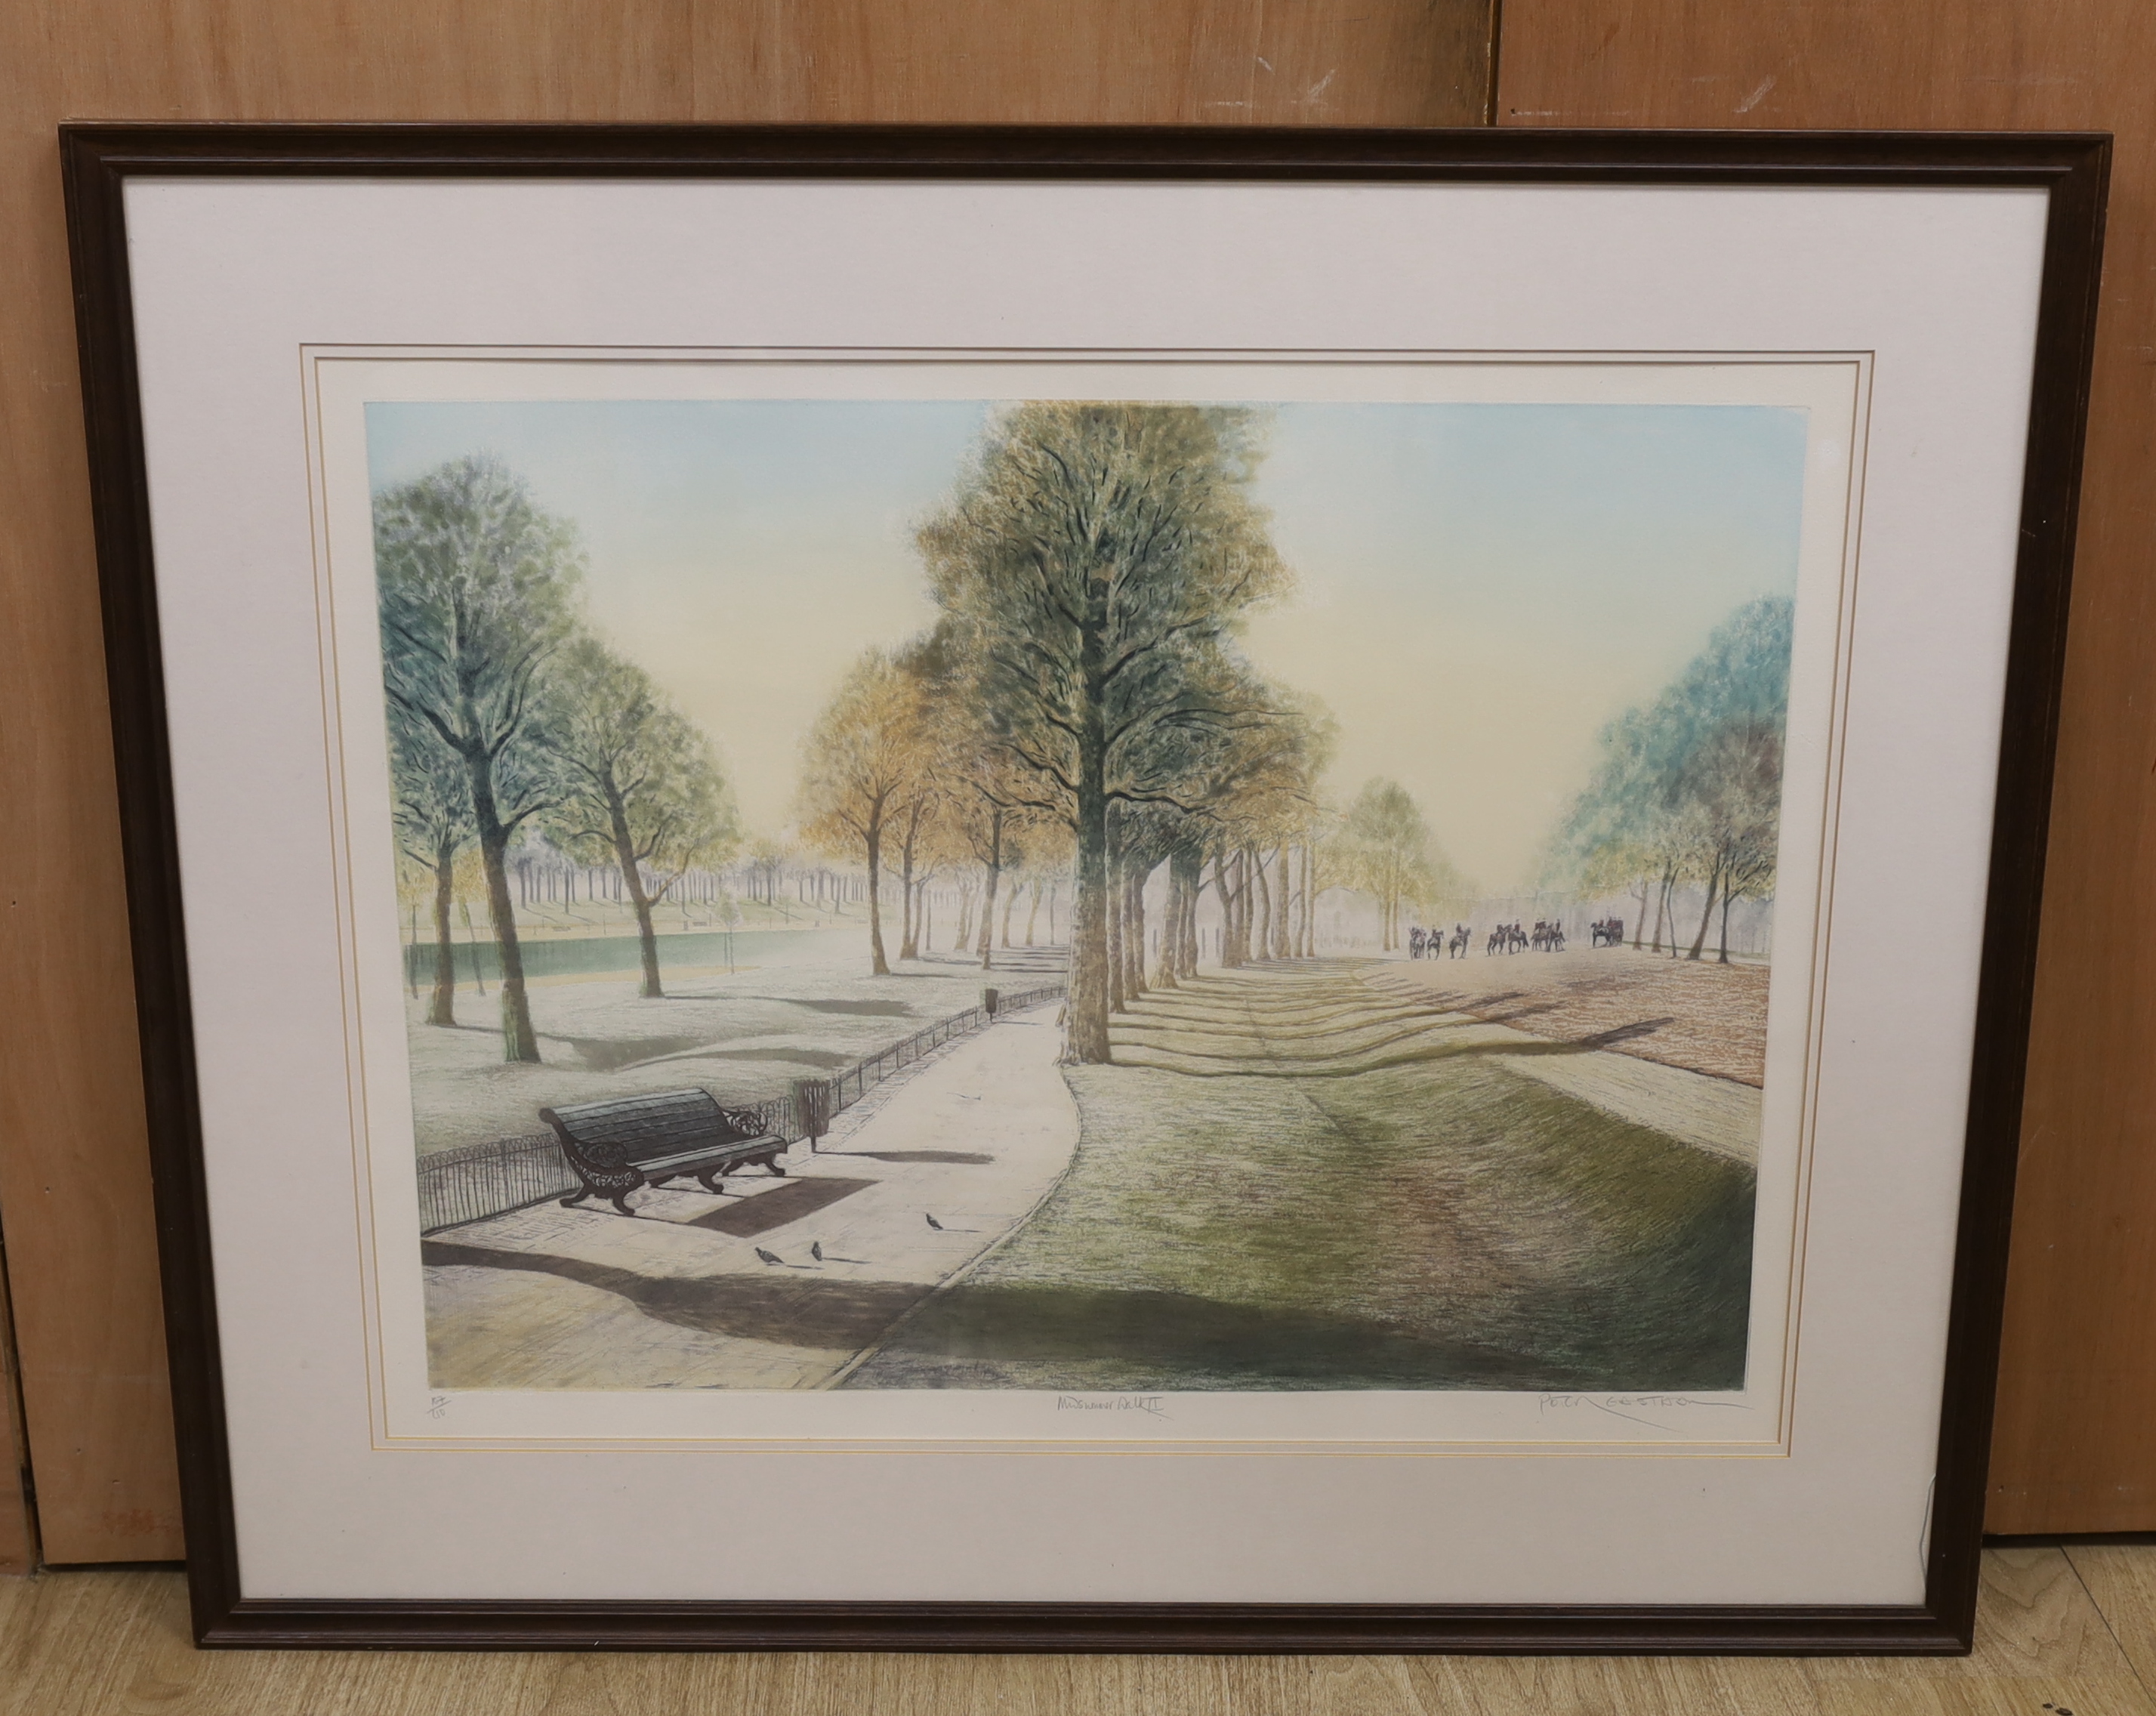 Peter Eastham (b.1956), colour etching, 'Mid Summer Walk II', signed in pencil, limited edition 107/210, 57 x 74cm